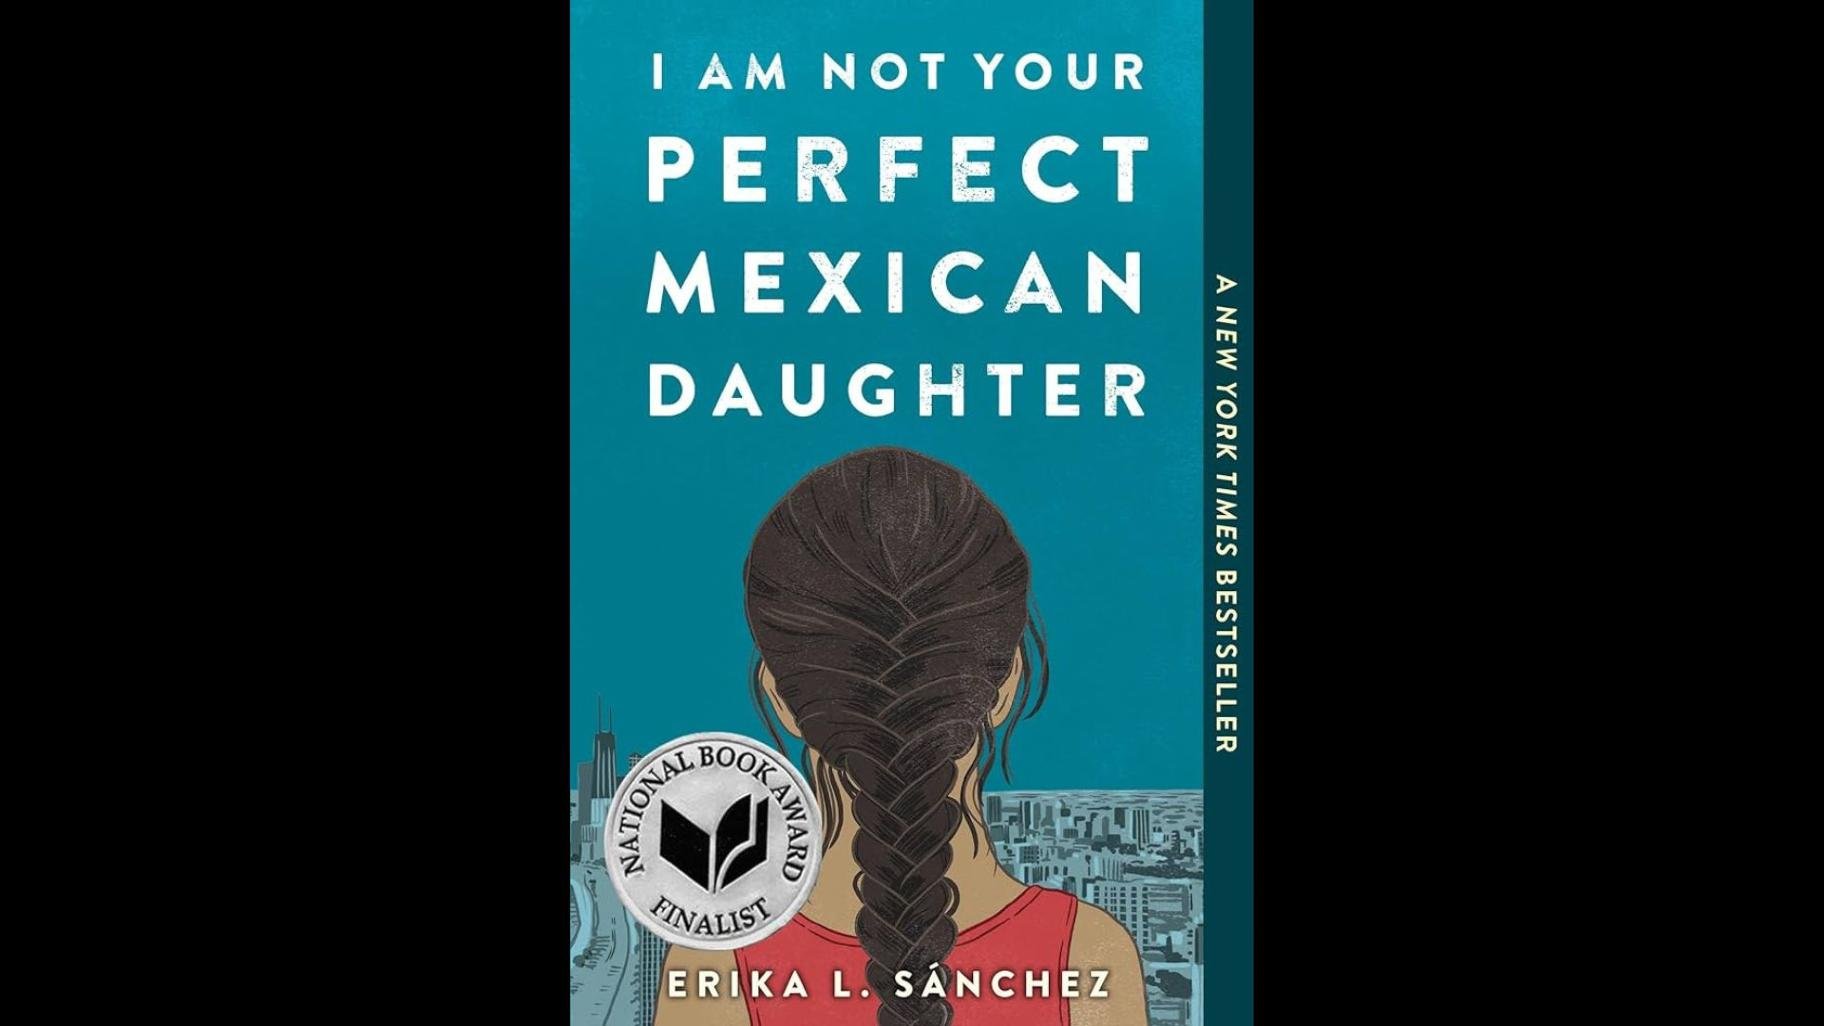 “I Am Not Your Perfect Mexican Daughter” by Erika L. Sánchez